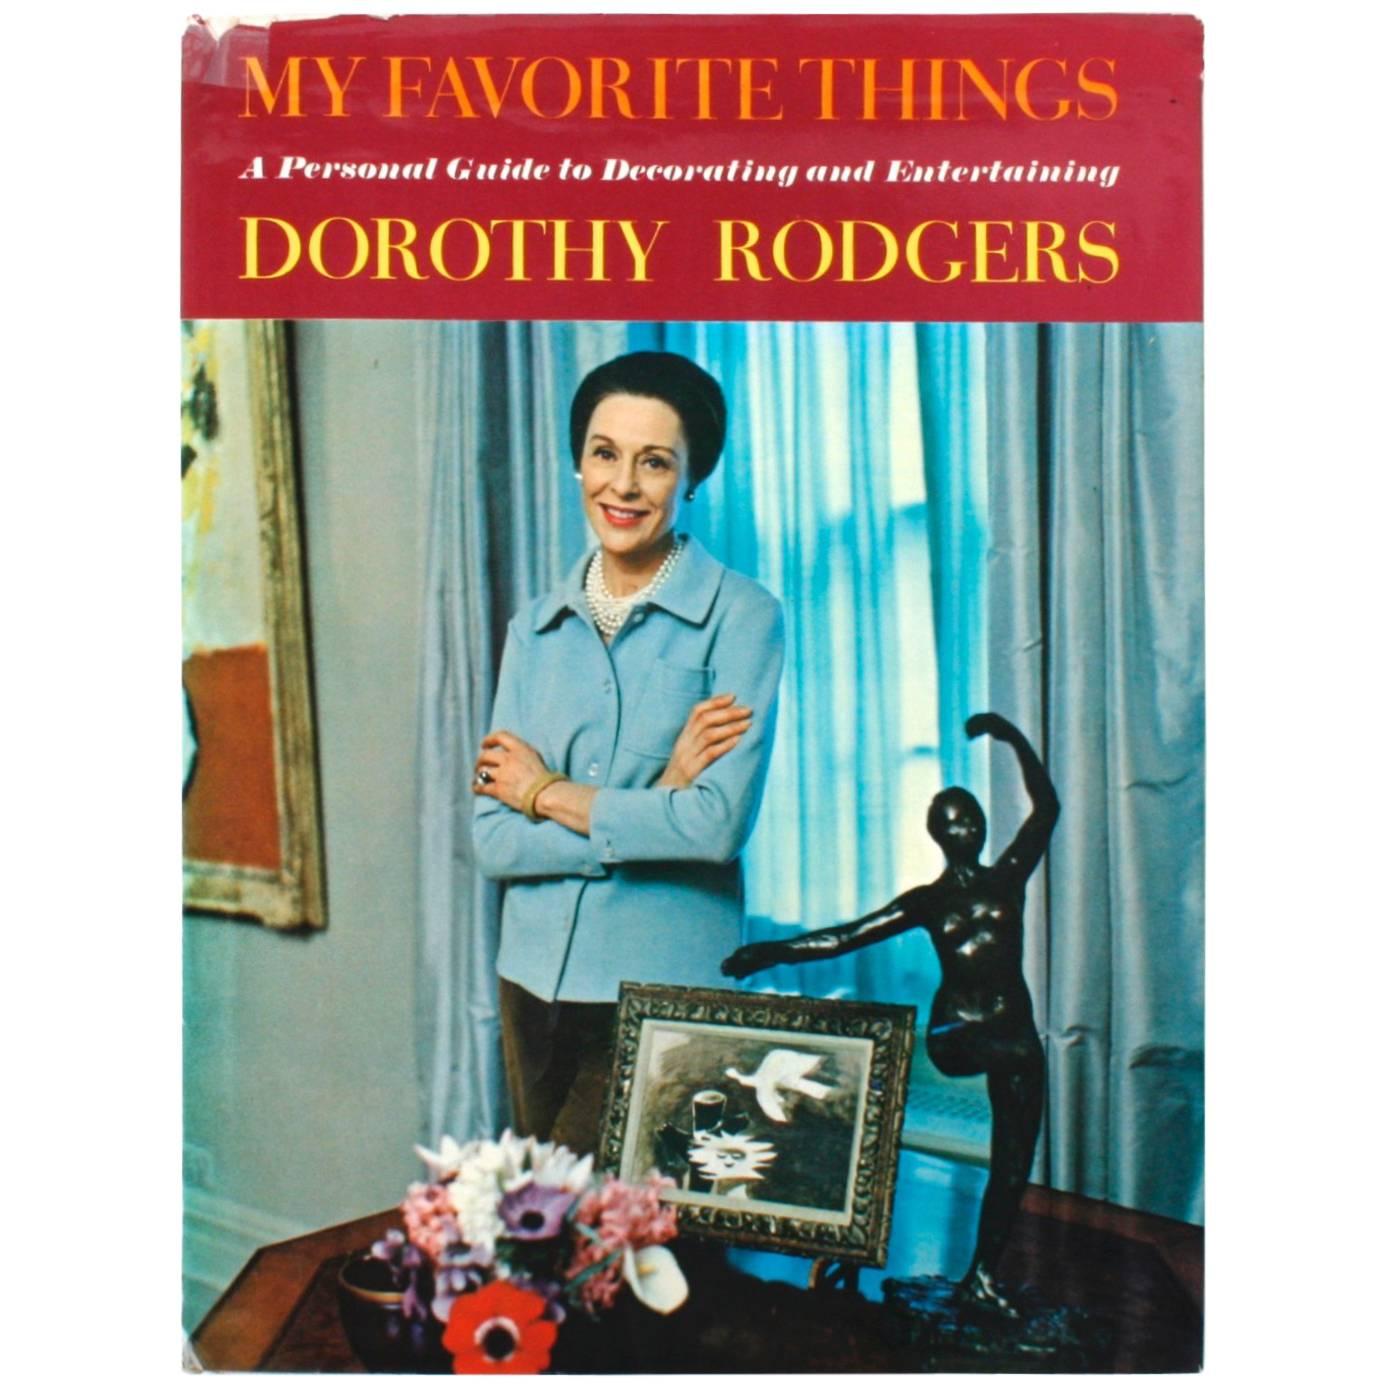 My Favorite Things by Dorothy Rodgers, First Edition